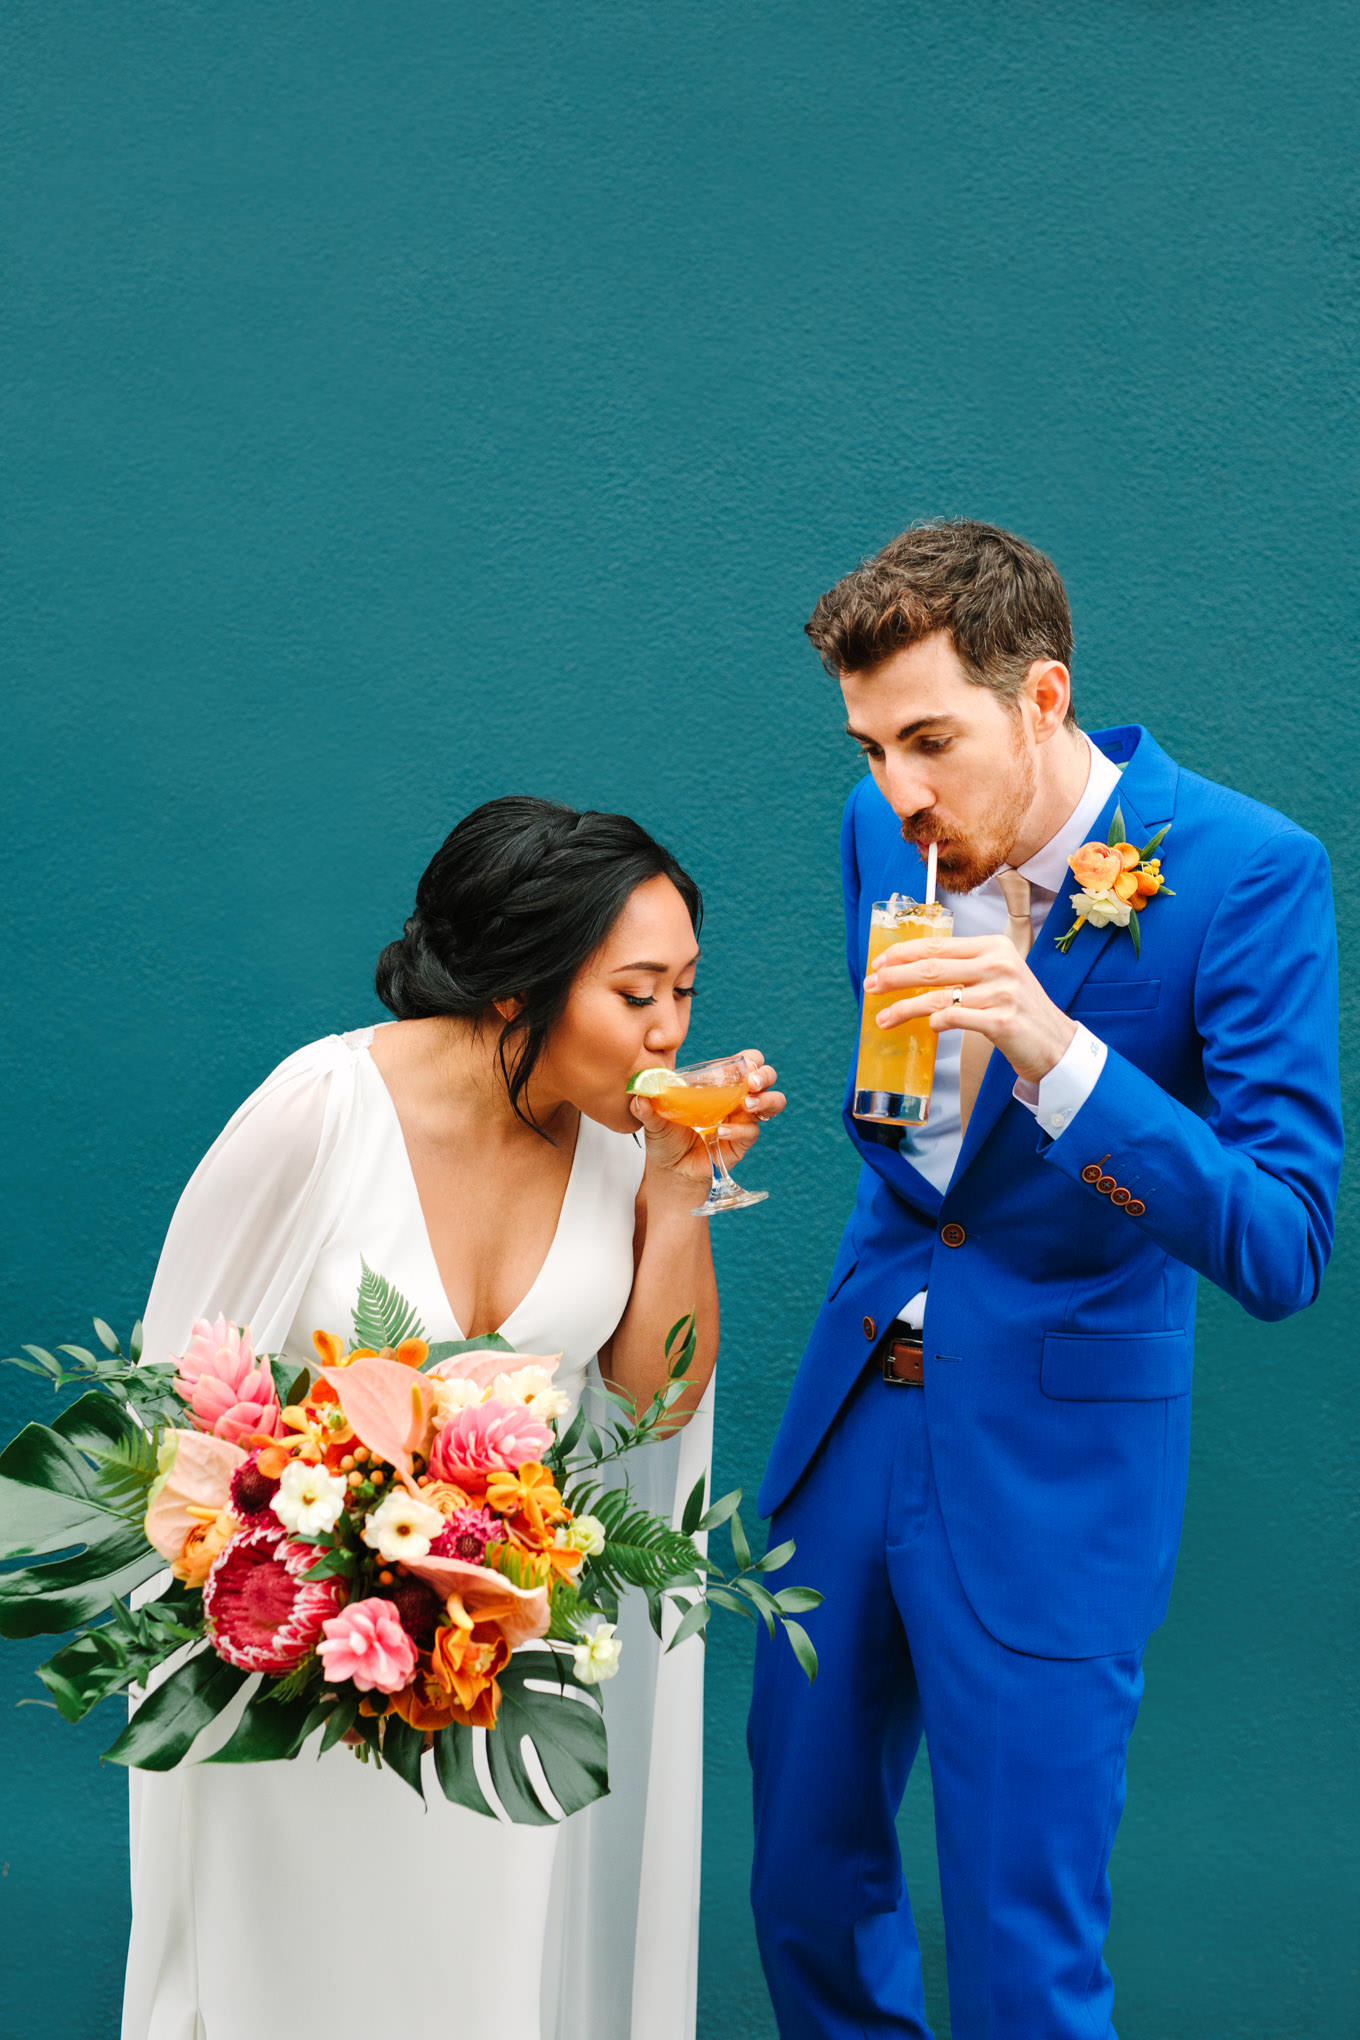 Bride and groom drinking cocktails | TV inspired wedding at The Fig House Los Angeles | Published on The Knot | Fresh and colorful photography for fun-loving couples in Southern California | #losangeleswedding #TVwedding #colorfulwedding #theknot   Source: Mary Costa Photography | Los Angeles wedding photographer